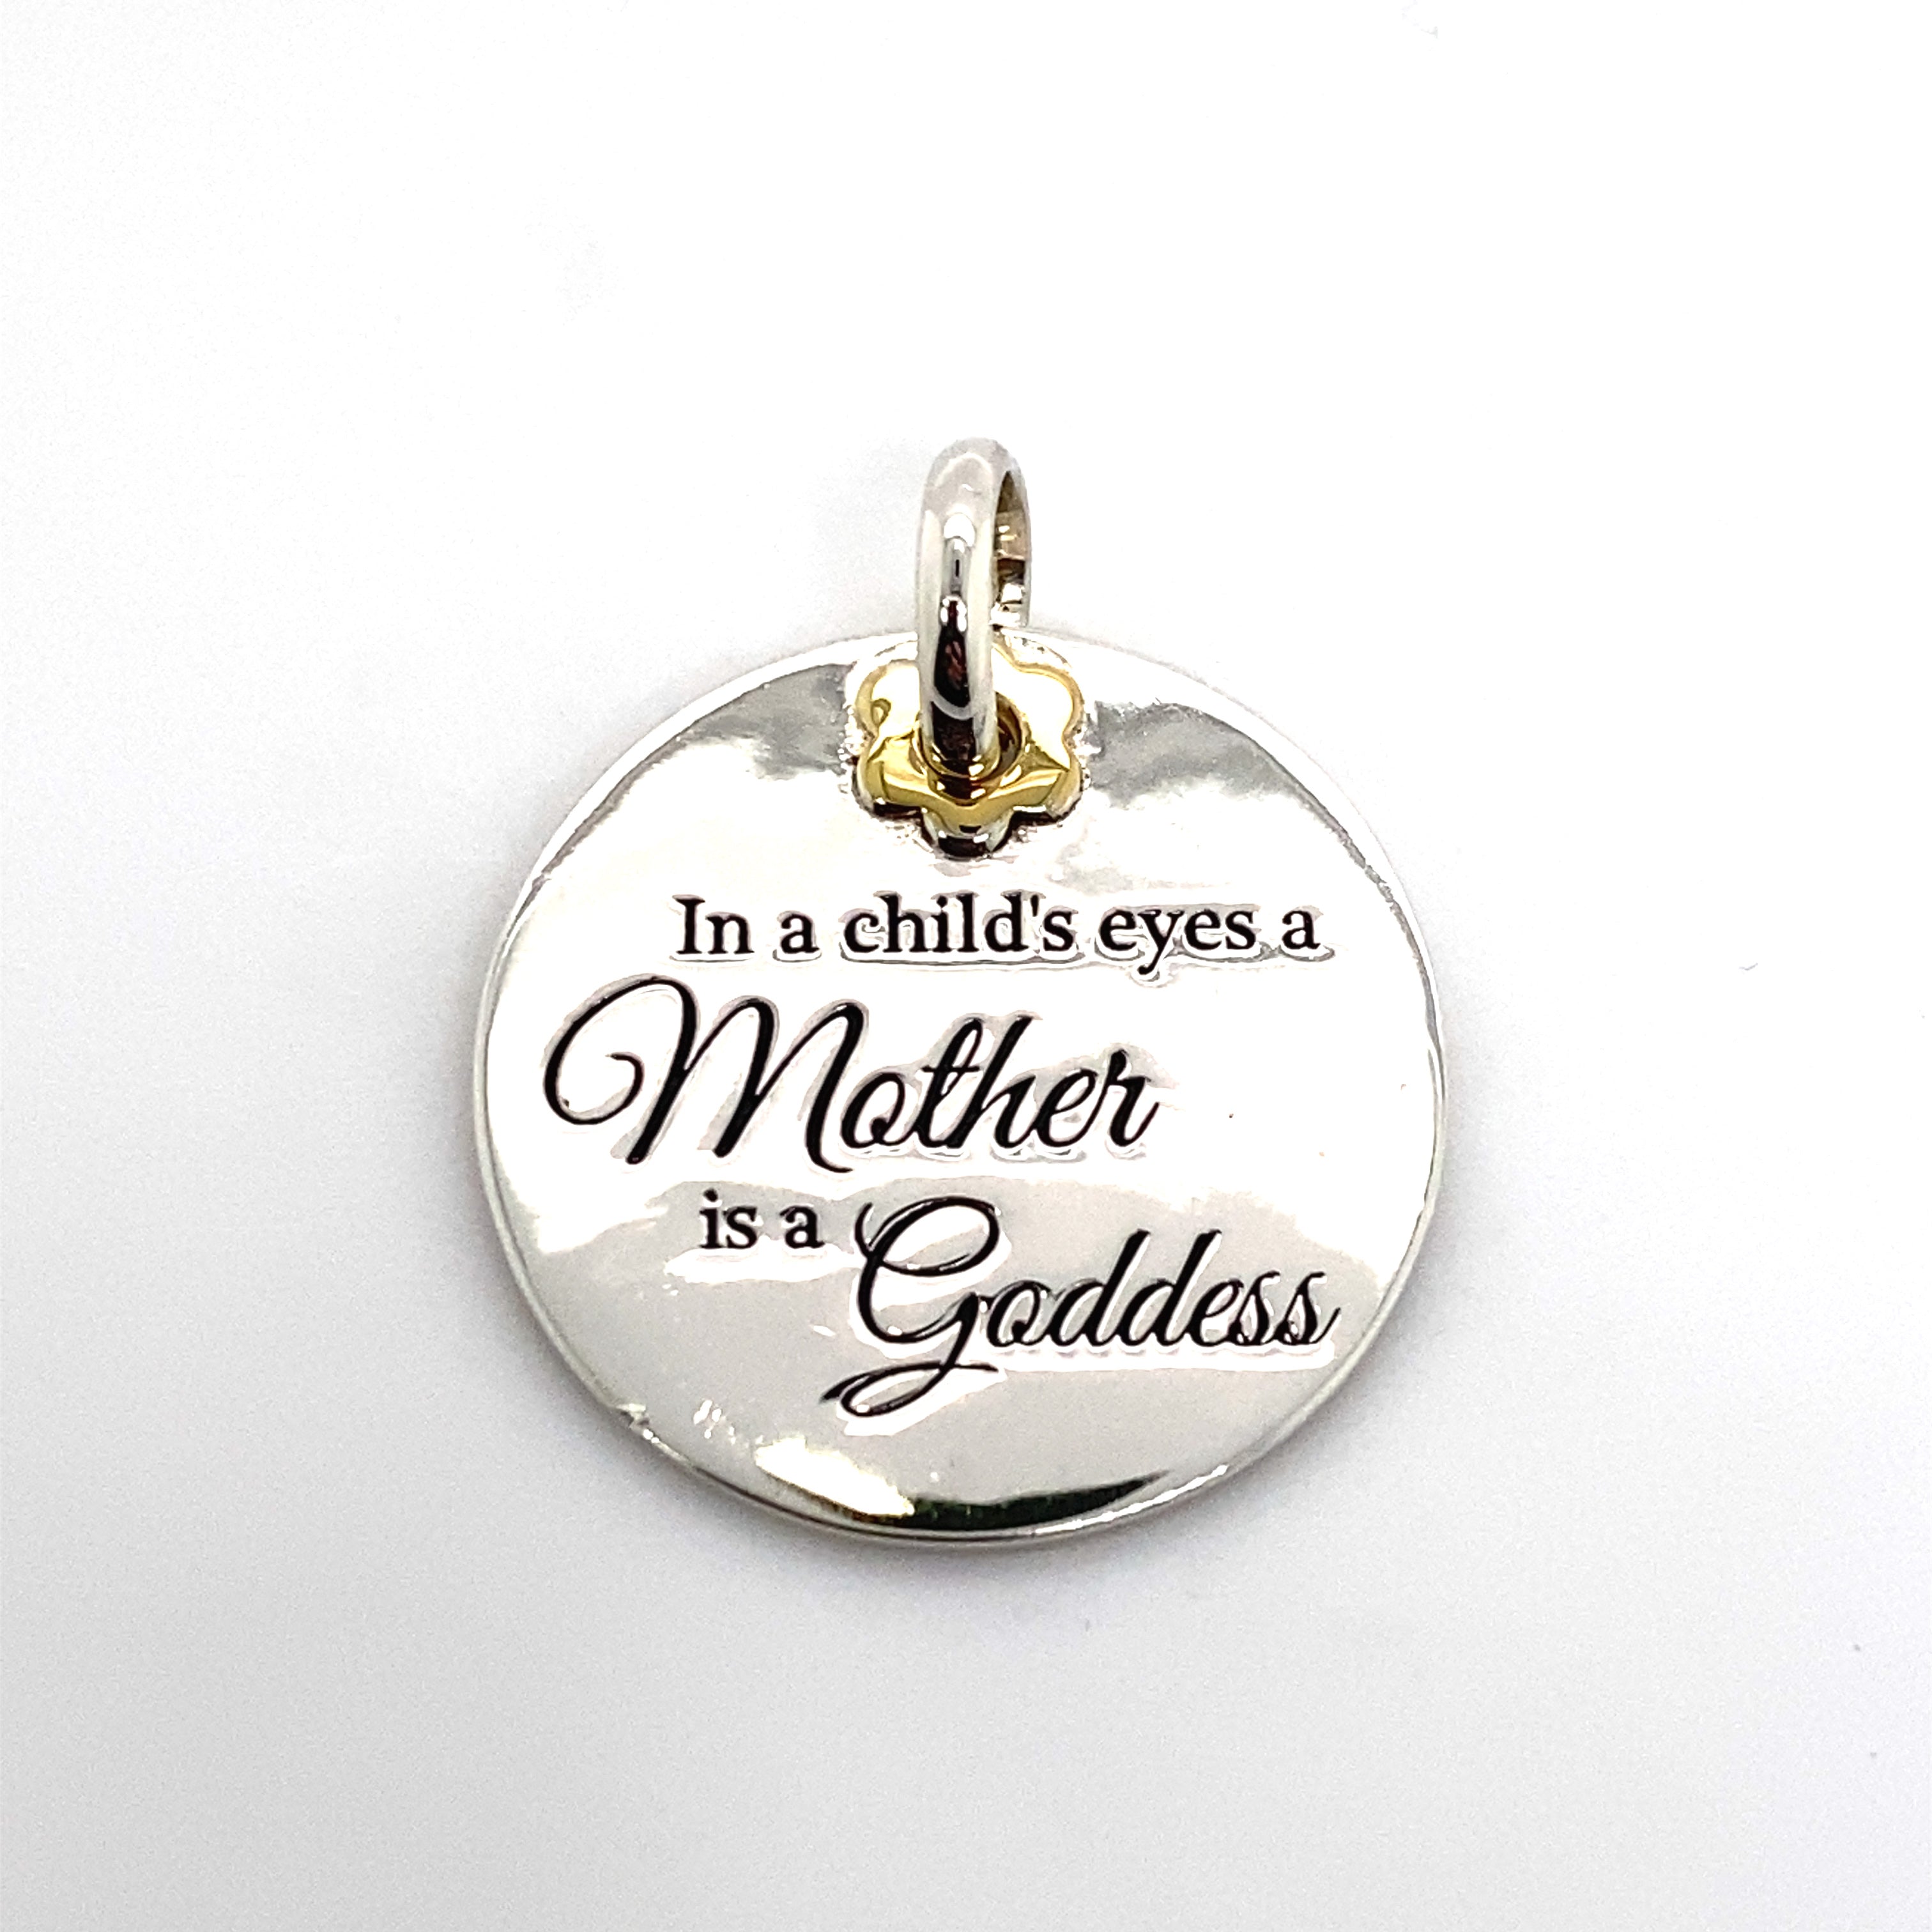 in a child's eyes a... pendant charm